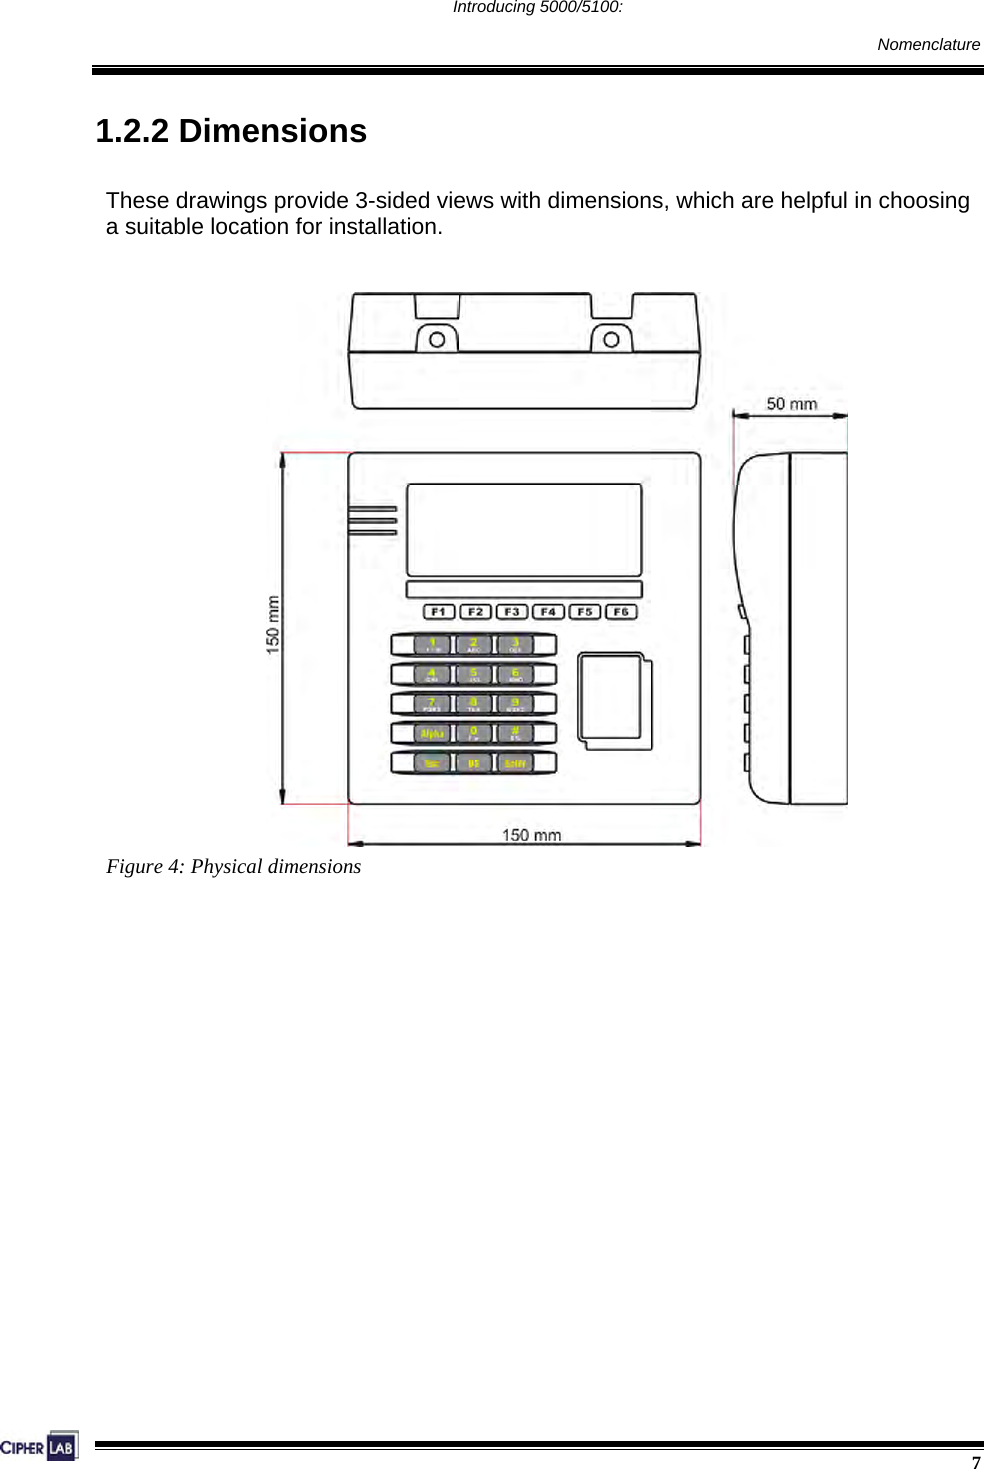  7  Introducing 5000/5100:     Nomenclature  1.2.2 Dimensions These drawings provide 3-sided views with dimensions, which are helpful in choosing a suitable location for installation.                   Figure 4: Physical dimensions     